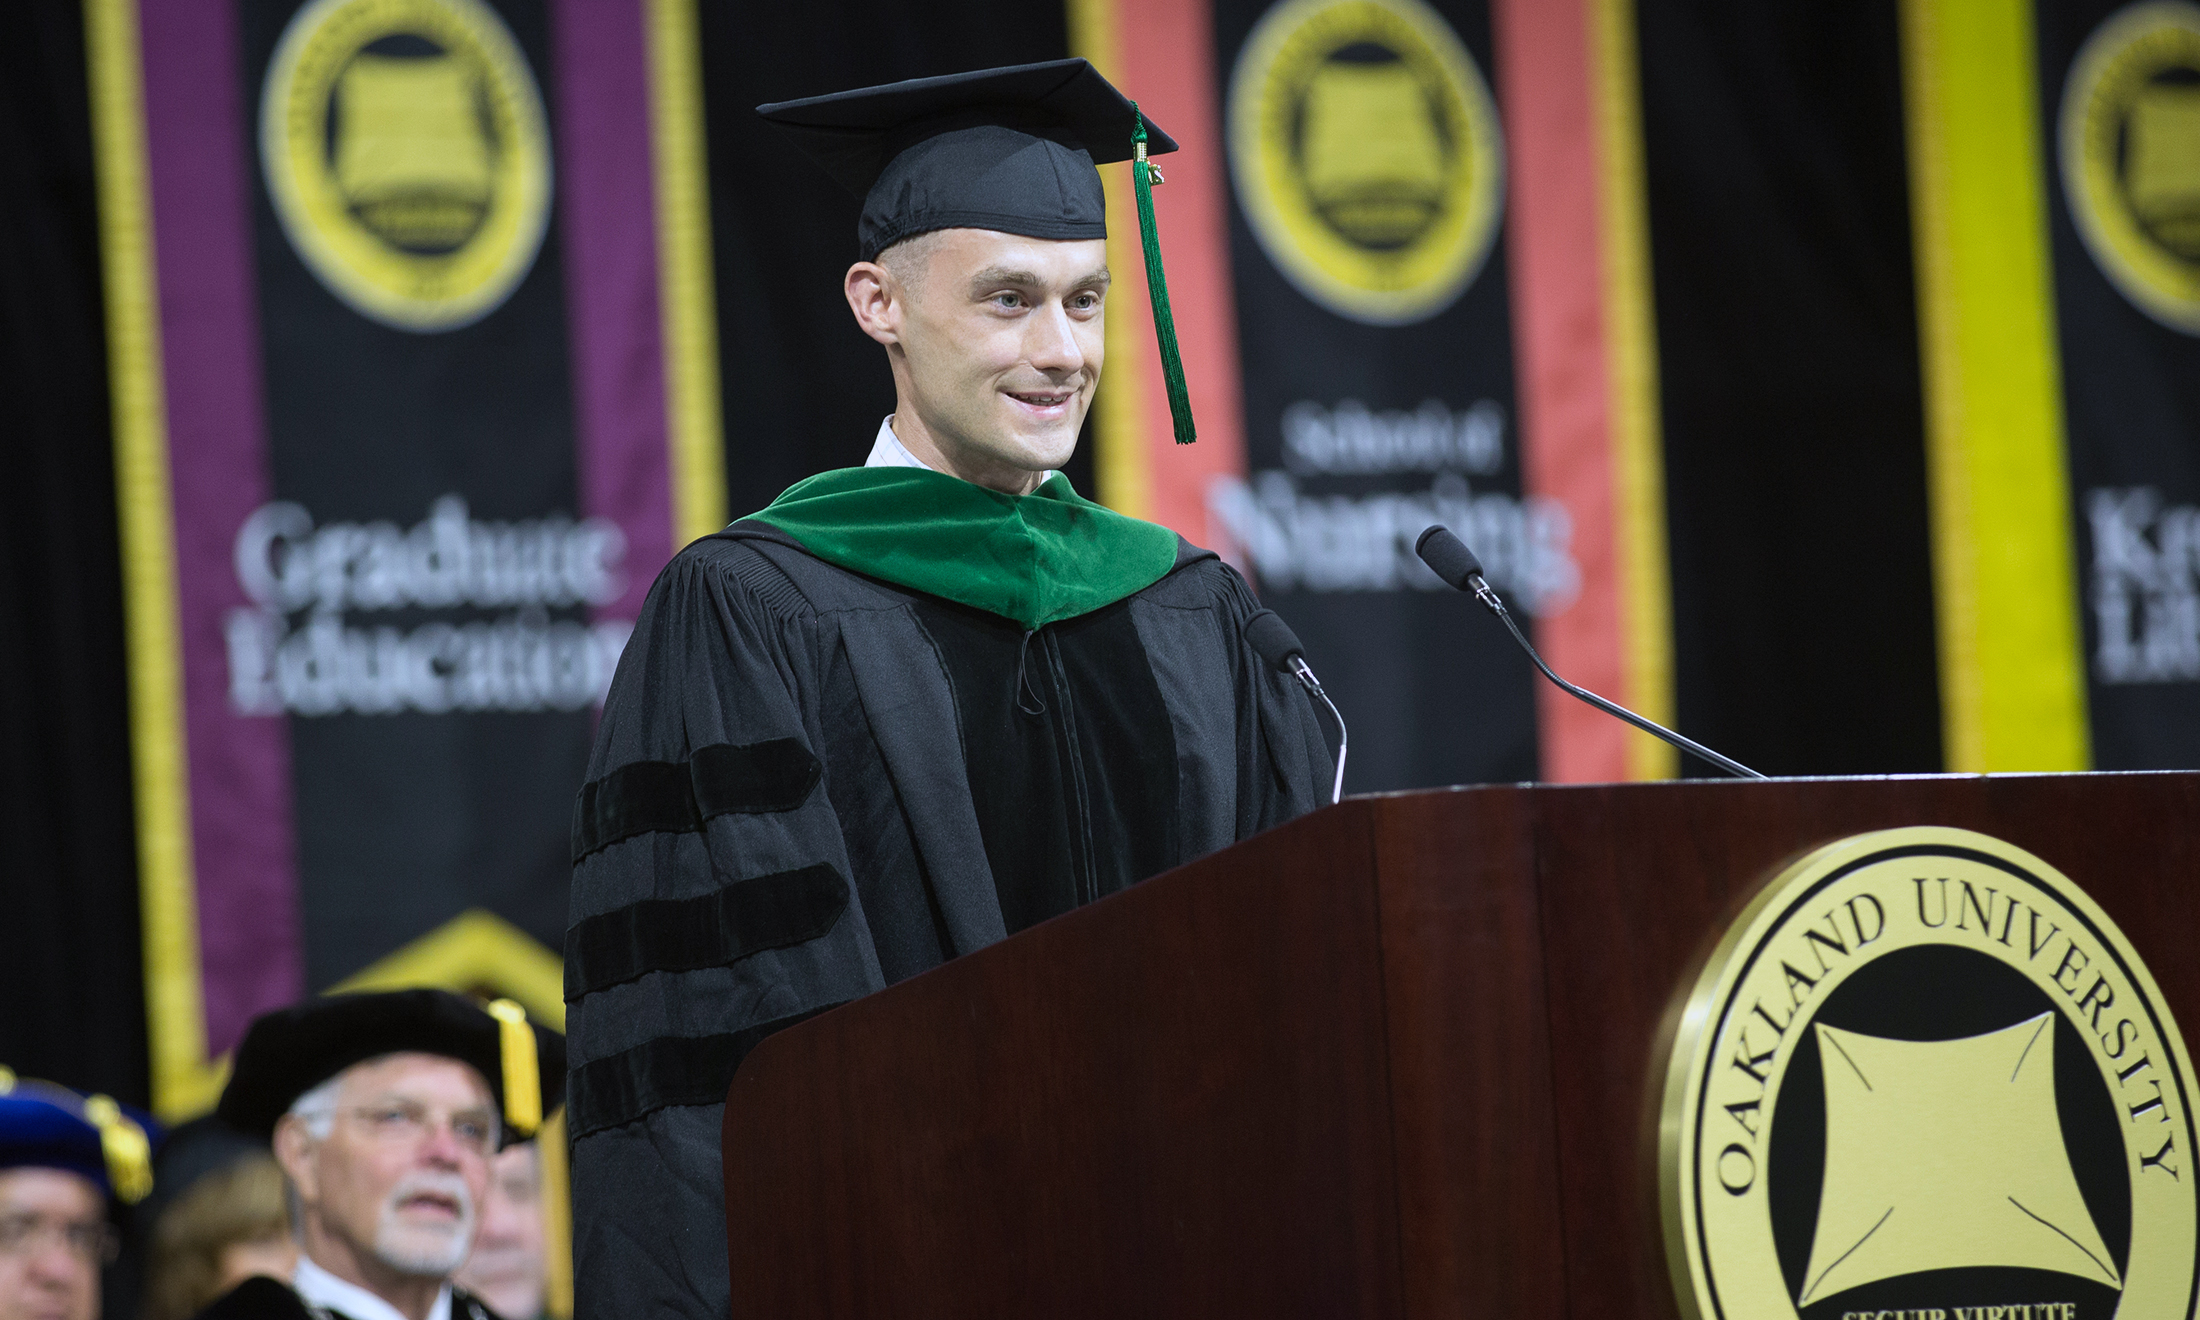 An image of Woody Sams speaking at commencement